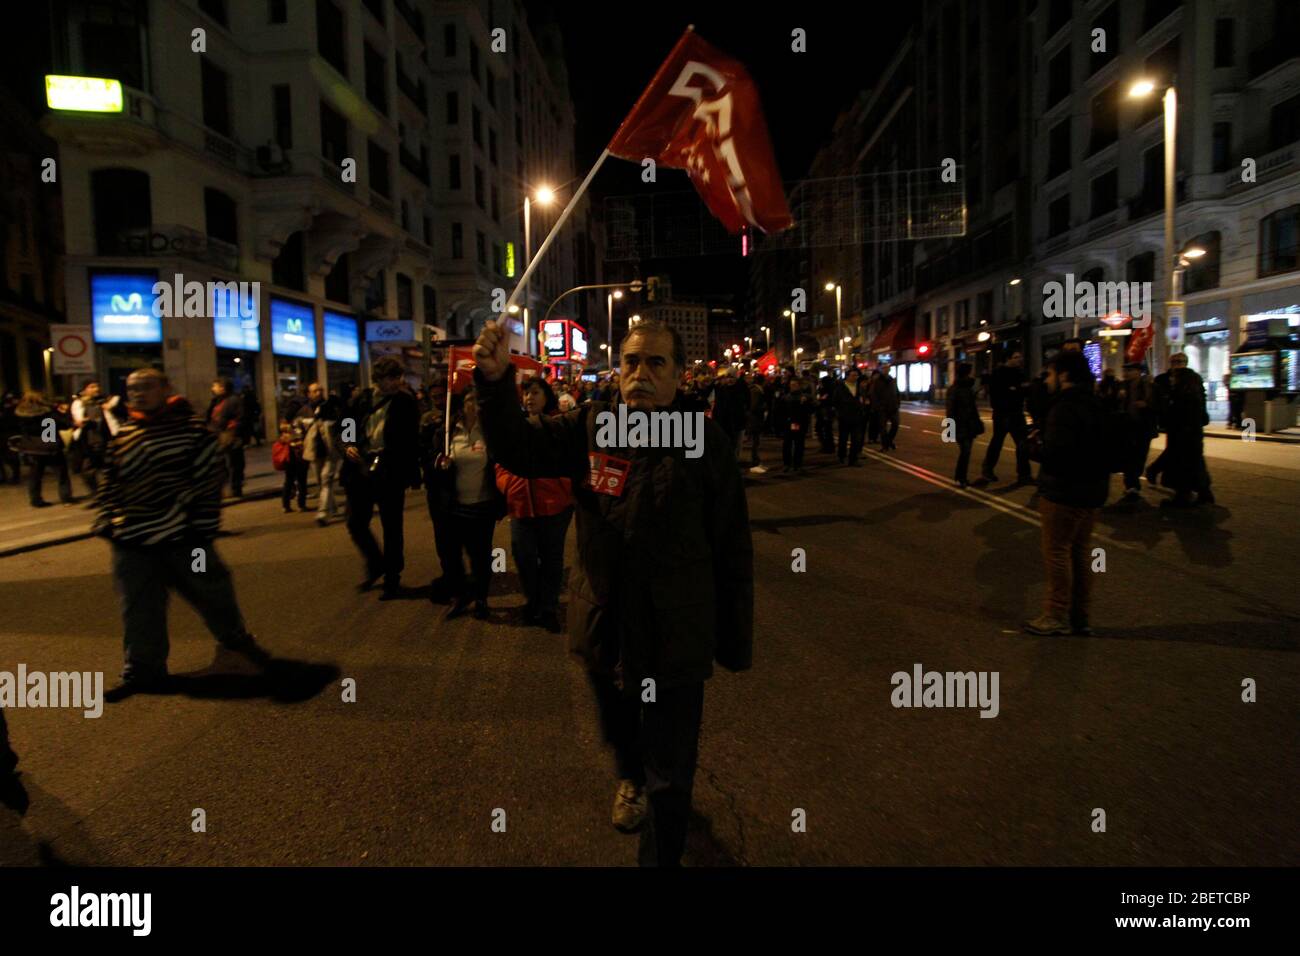 European General Strike.Protesters and trade unionists through the streets of Madrid in the early hours of the strike in Spain.November 14,2012. (ALTE Stock Photo